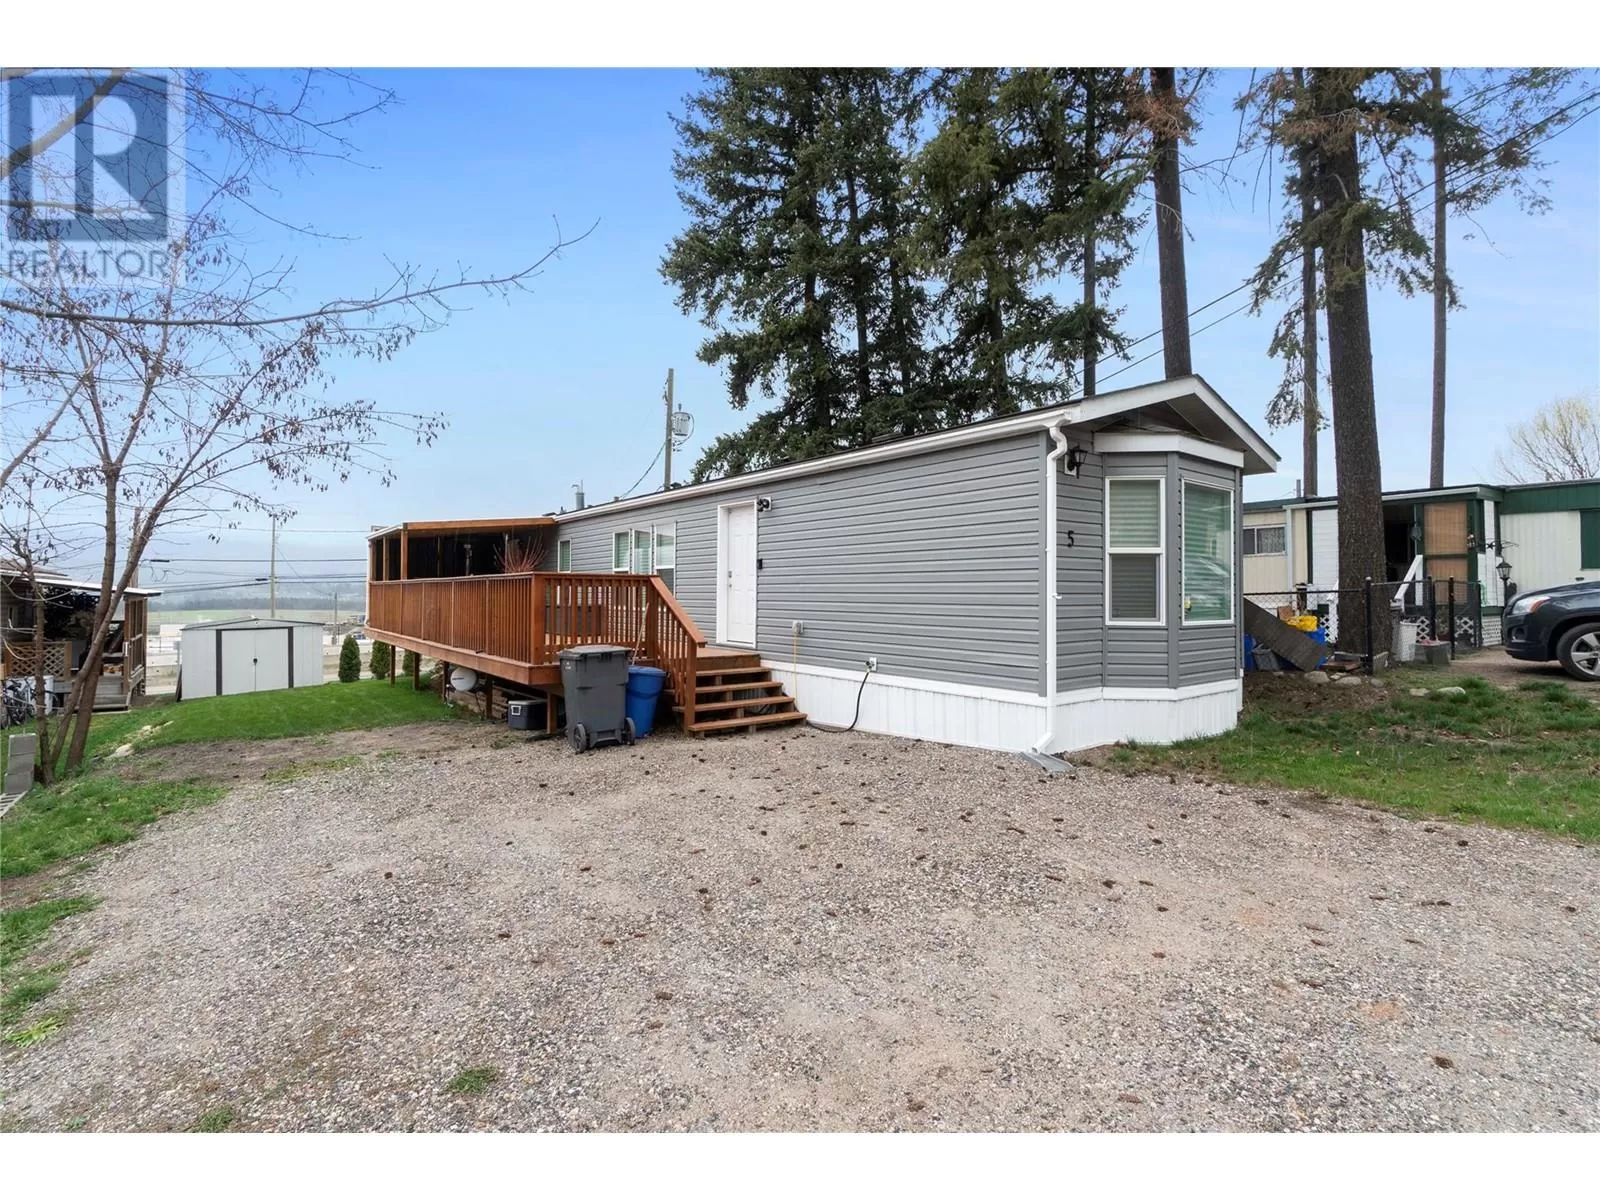 Manufactured Home for rent: 934 Hutley Road Unit# 5, Armstrong, British Columbia V0E 1B7